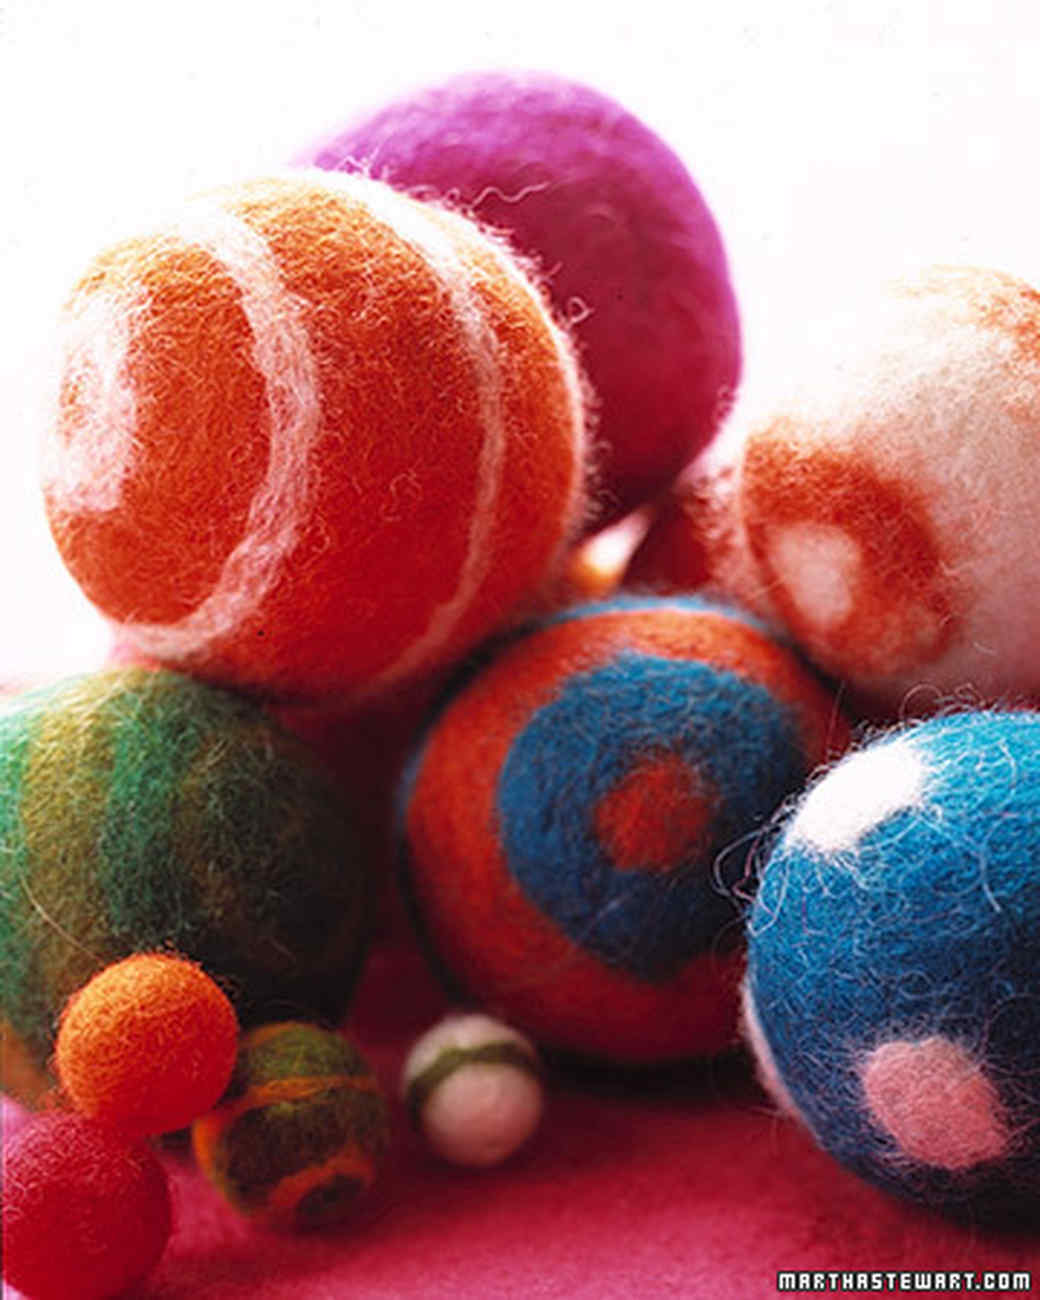 how to make felted wool balls